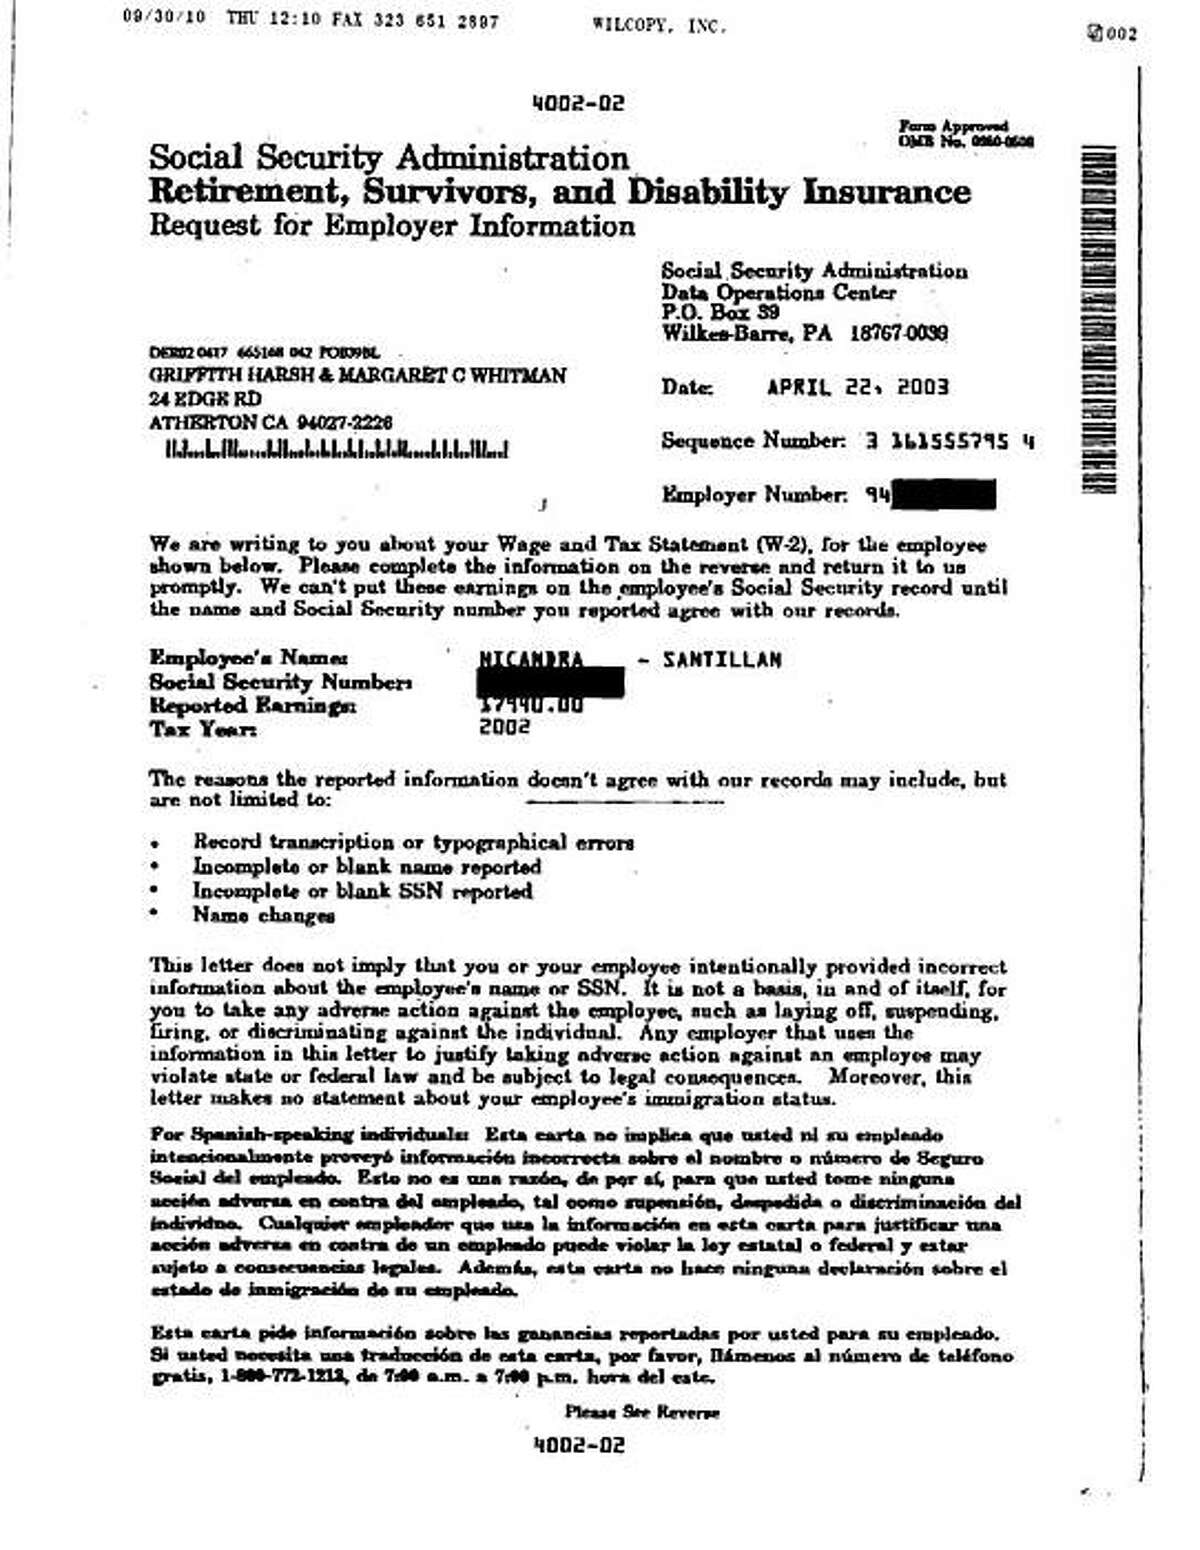 First page of a letter written by the Social Security Administration to Meg Whitman and Griffith Harsh on April 22, 2003, provided by attorney Gloria Allred.